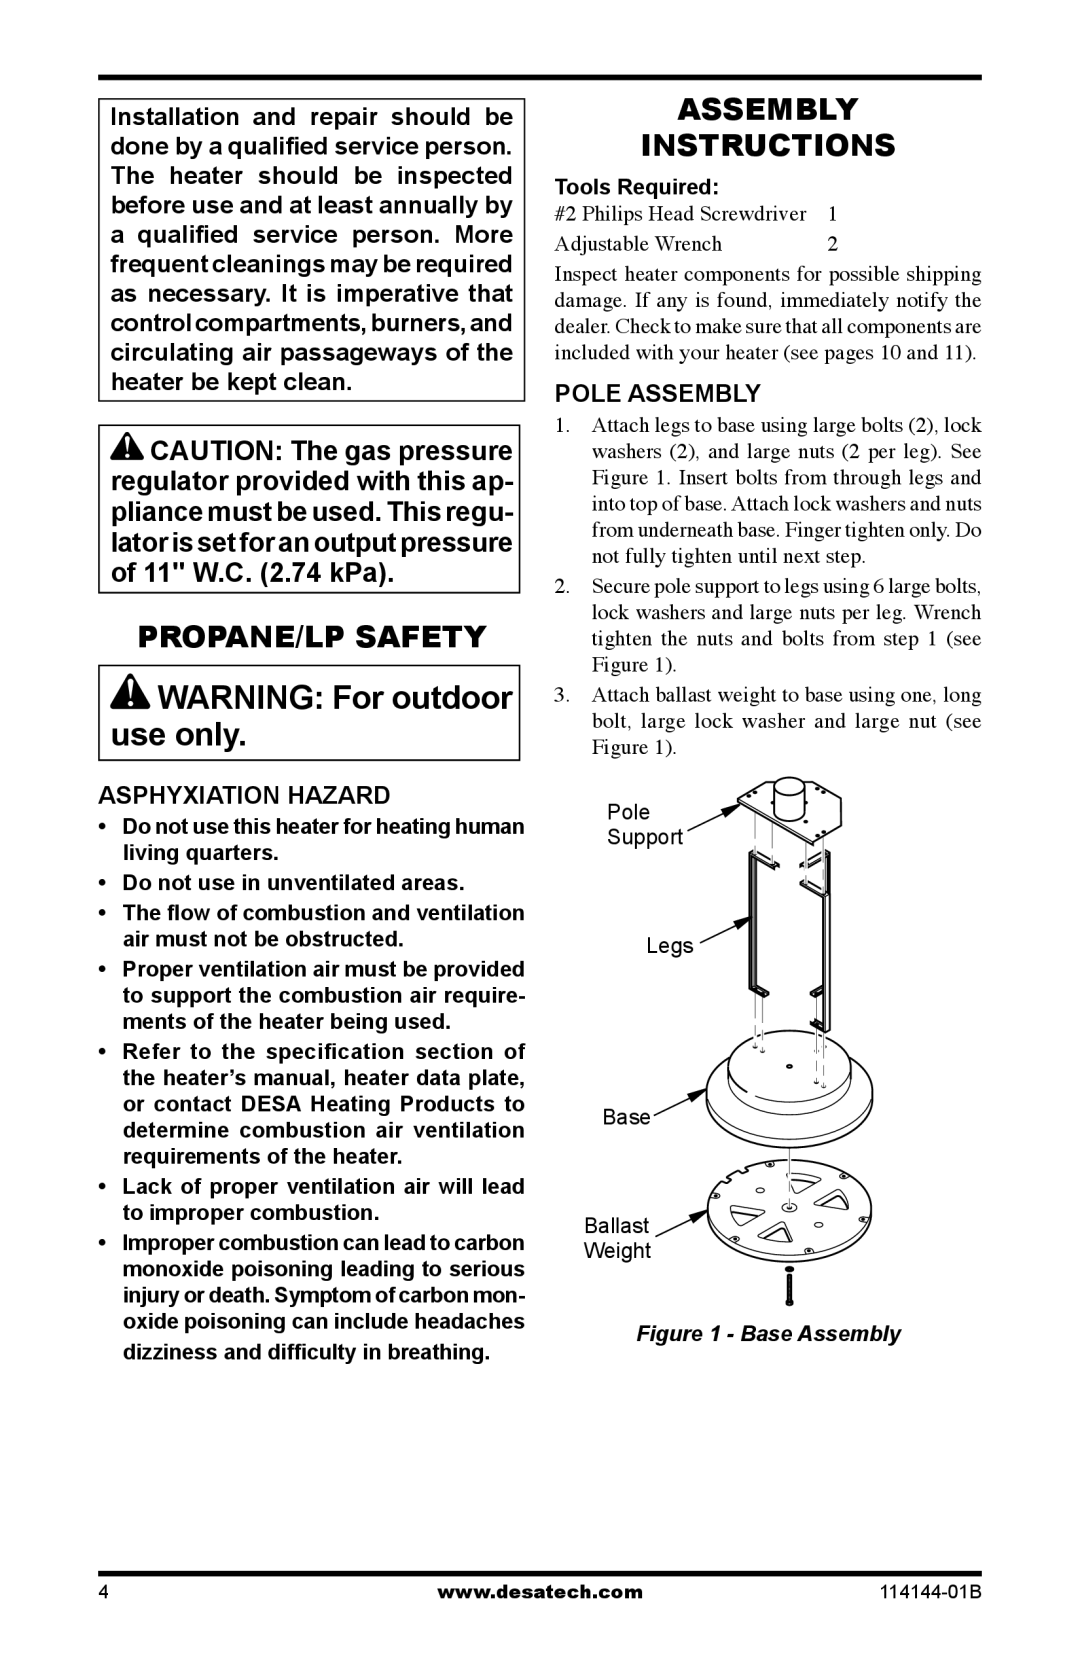 Desa AND SPC-54PHT owner manual Propane/Lp Safety, Assembly Instructions, Asphyxiation Hazard, Pole Assembly, Base Assembly 